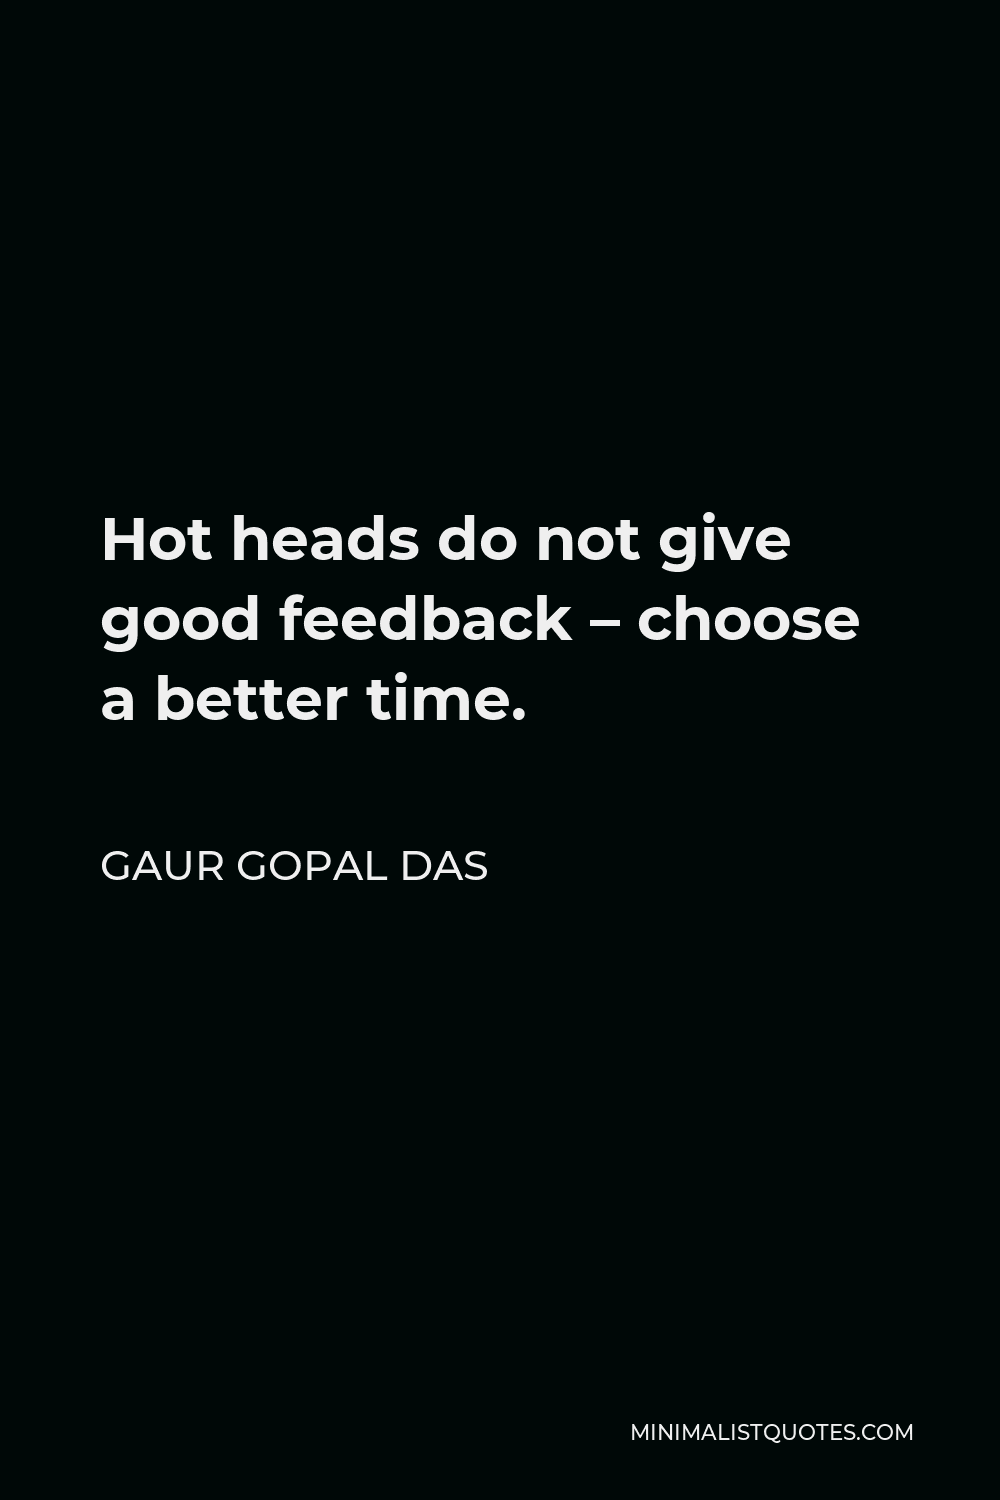 Gaur Gopal Das Quote - Hot heads do not give good feedback – choose a better time.